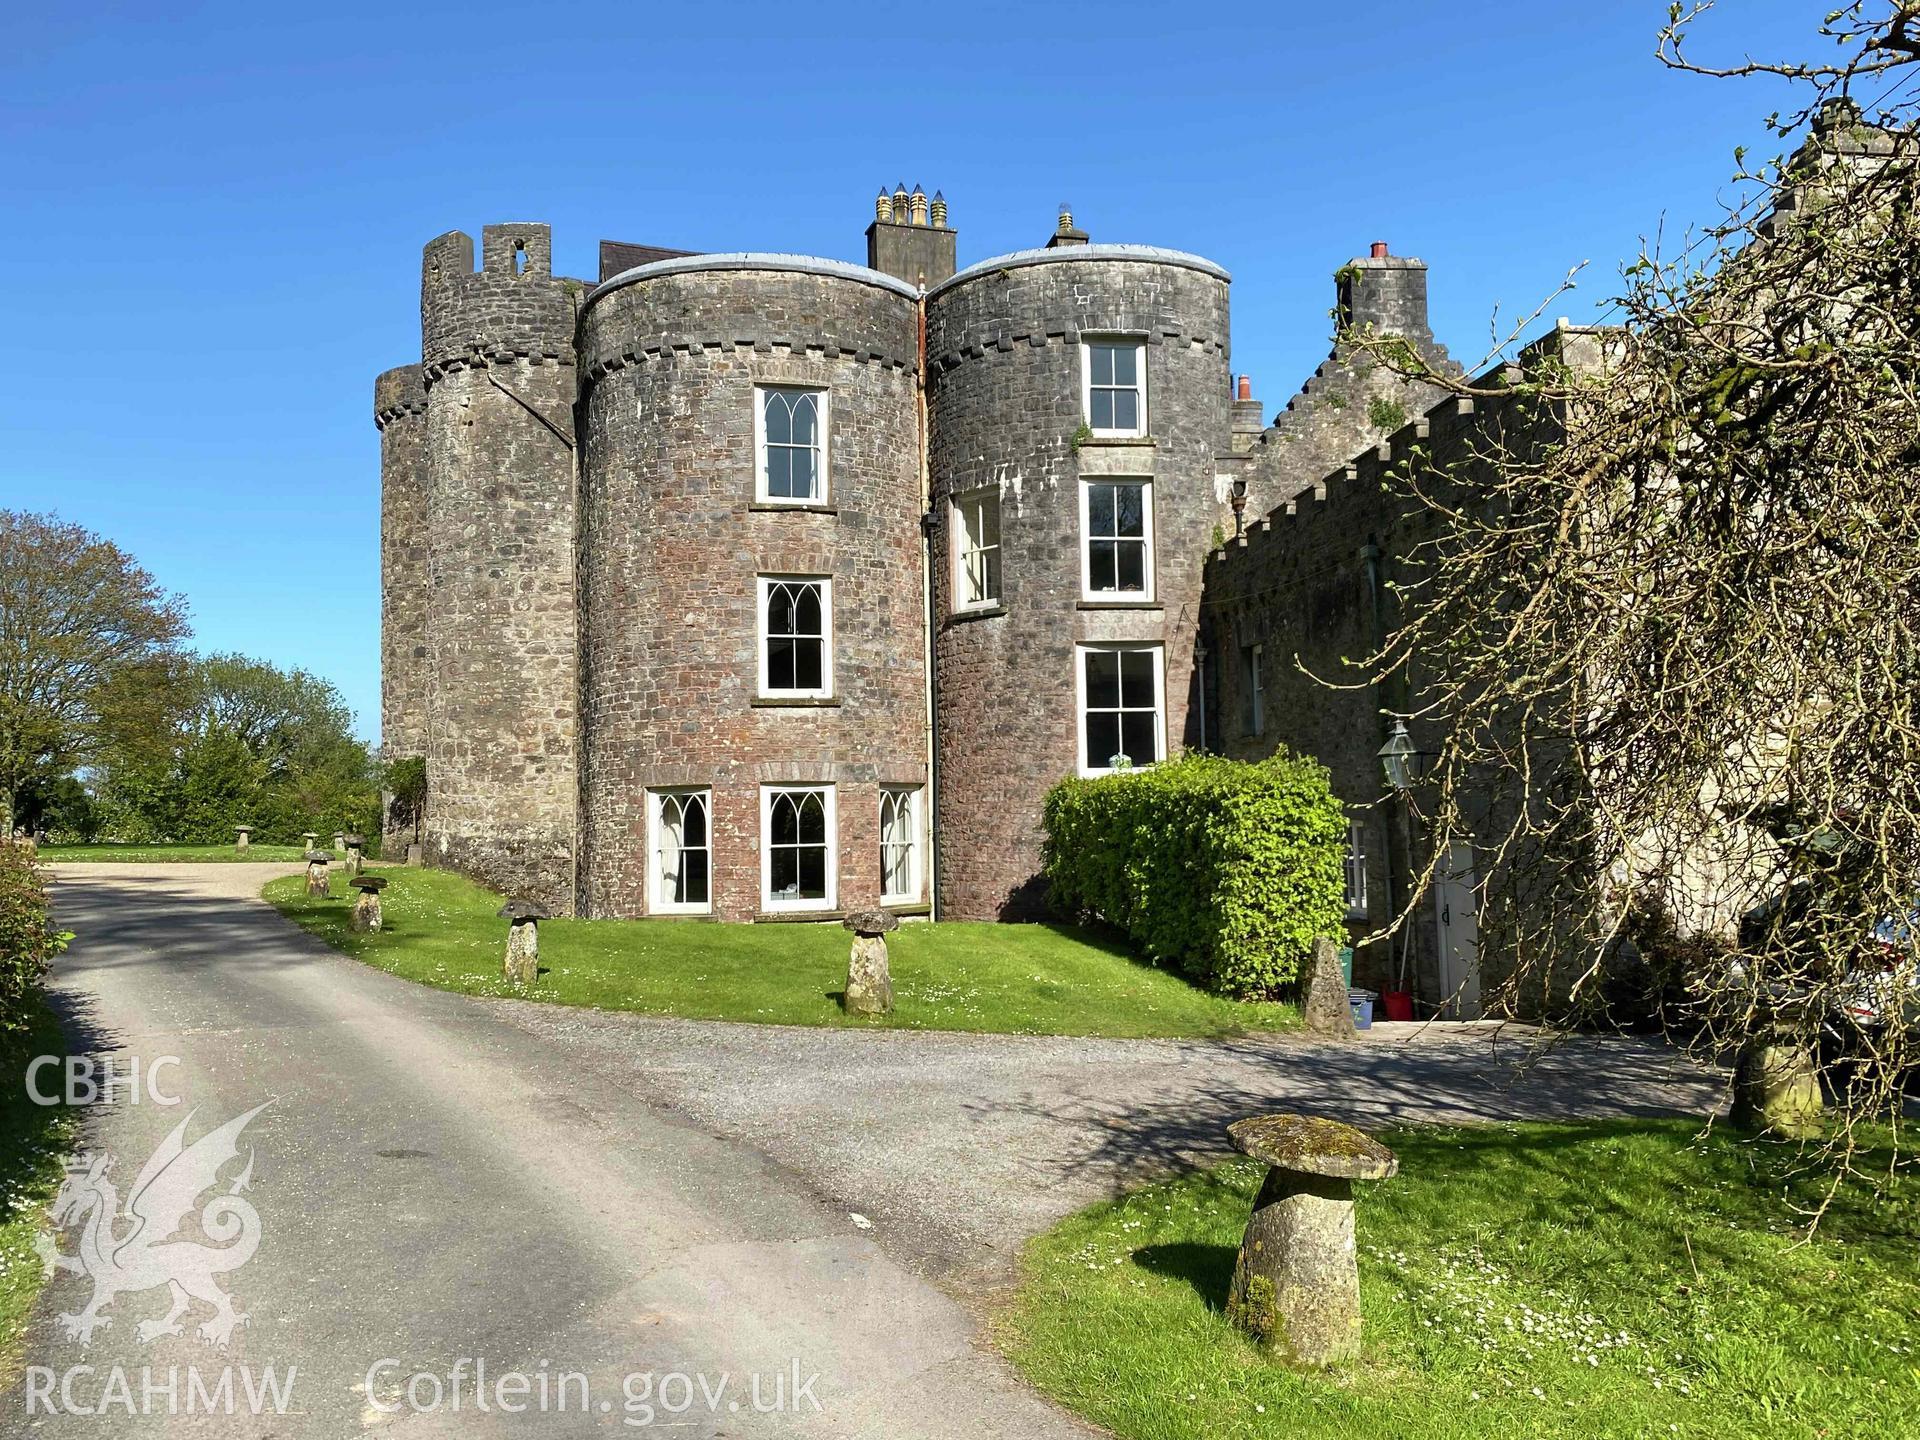 Digital photograph showing general view of Upton Castle, produced by Paul Davis in 2023